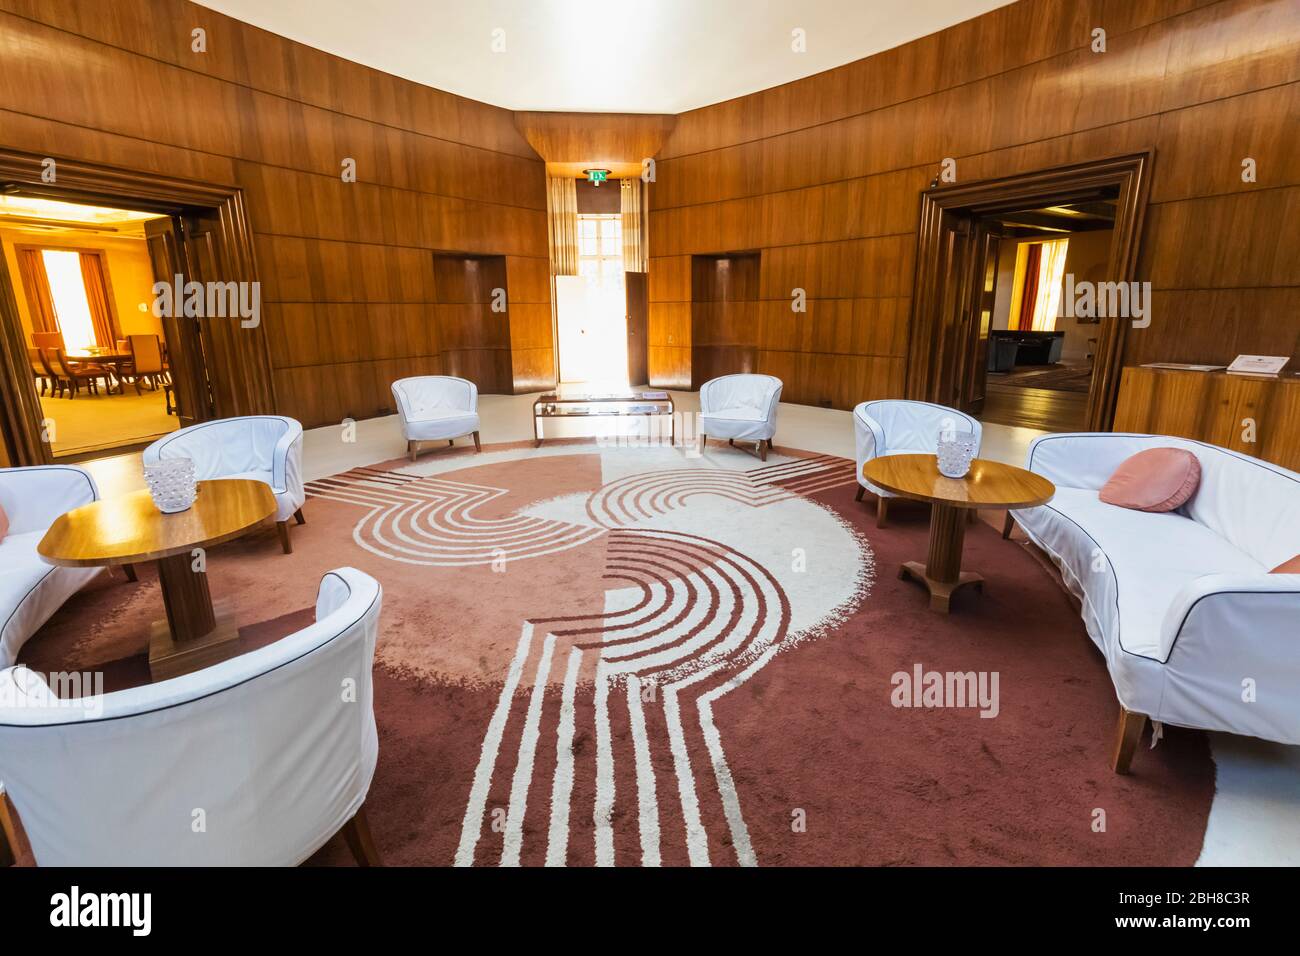 England, London, Greenwich, Eltham Palace, The Art Deco Former Home of Millionaires Stephen and Virginia Courtauld, Interior View of The Entrance Hall Stock Photo